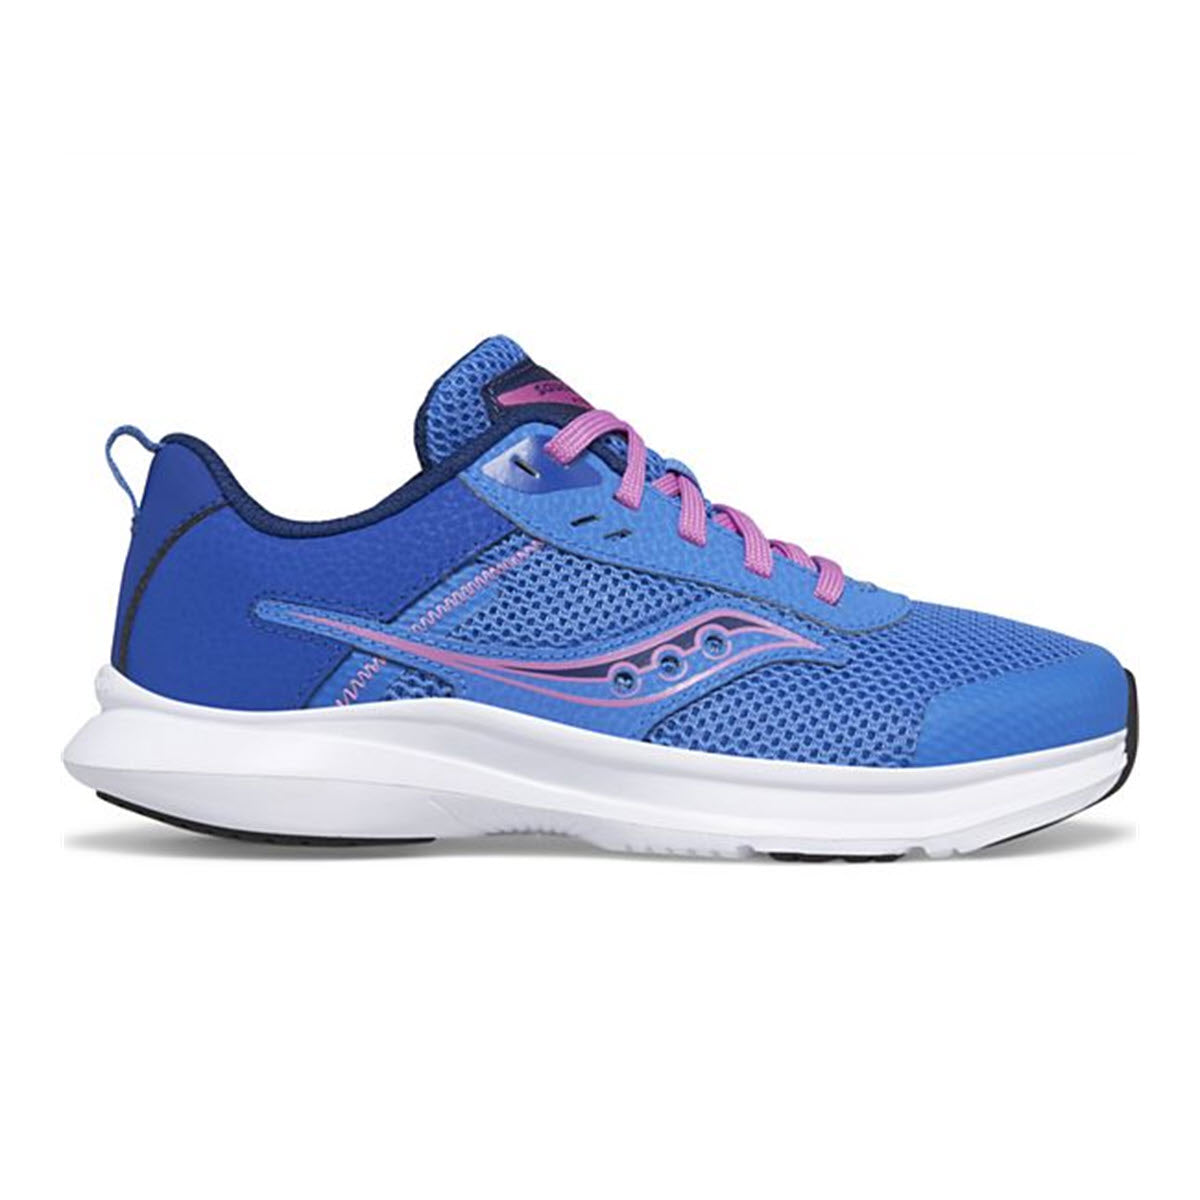 A blue and pink kids' Saucony Axon 3 running shoe with white soles, featuring breathable mesh and a wavy design on the side.